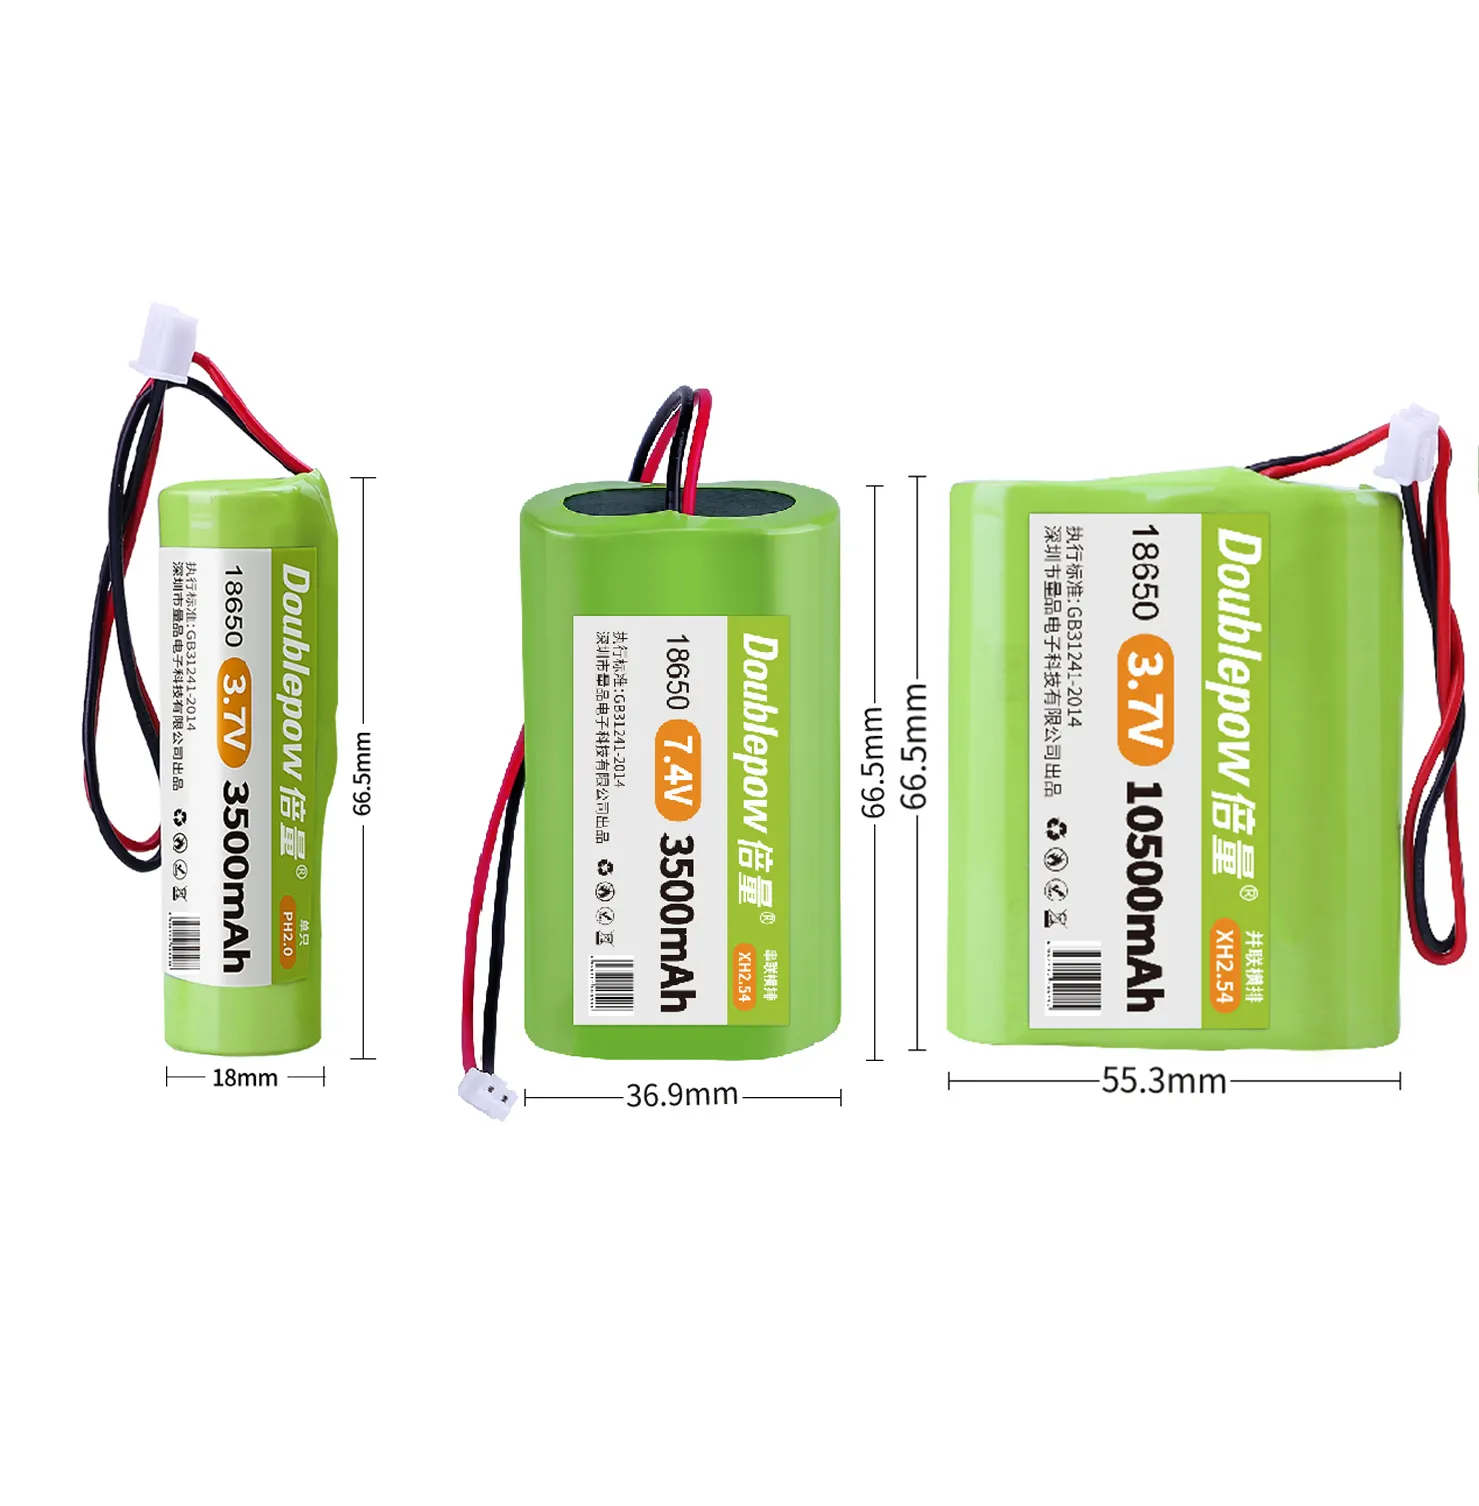 Custom 1800mAh 12V Li-Ion Rechargeable Lifepo4 Battery Pack 18650 3S1P for Power Tools Home Appliances Toys